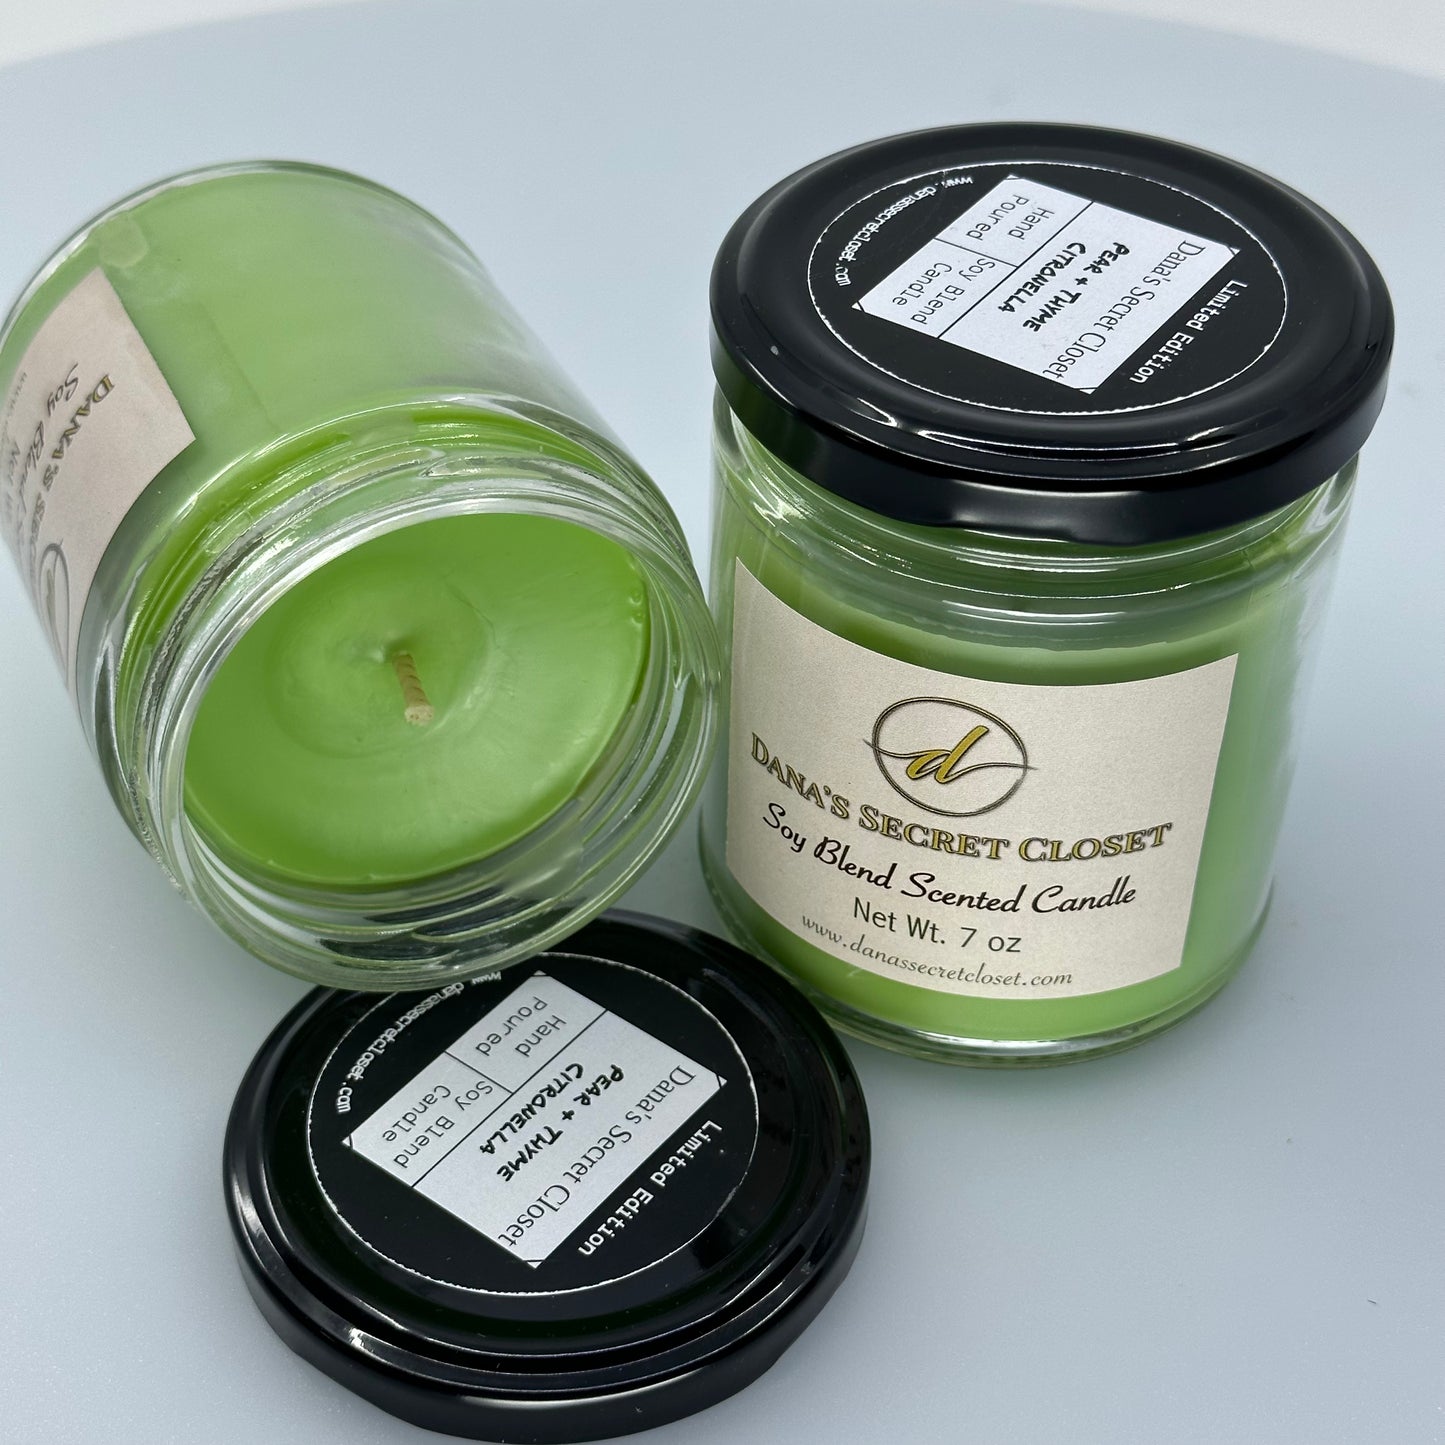 Pear and Thyme Citronella Candle